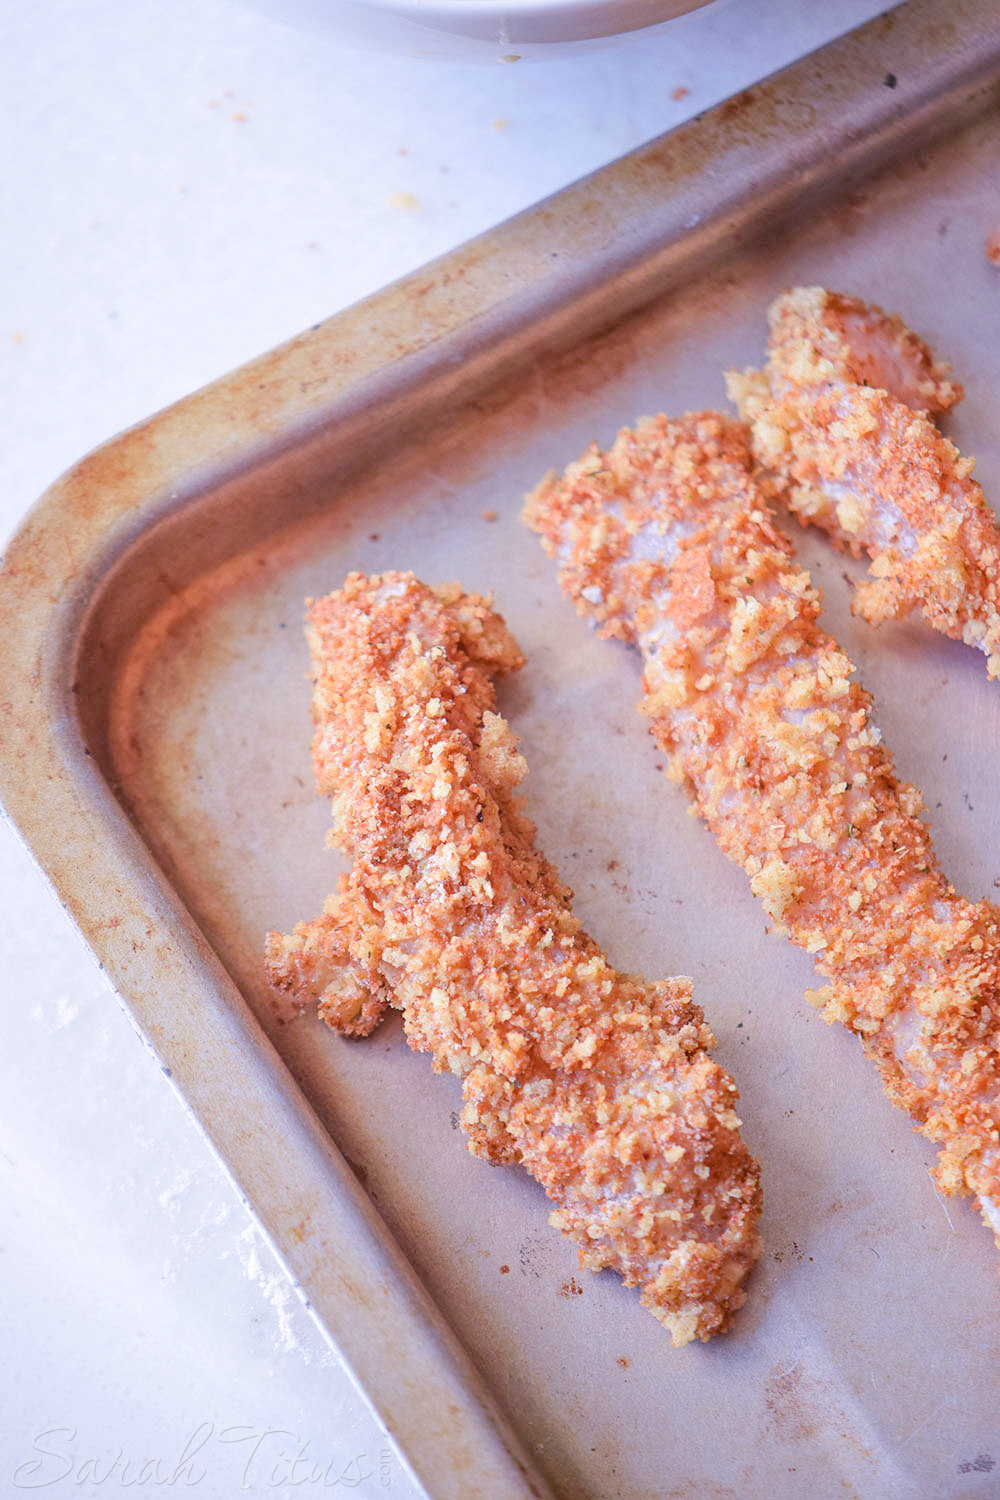 The coated chicken tenders laying out ready to bake on a sheet pan